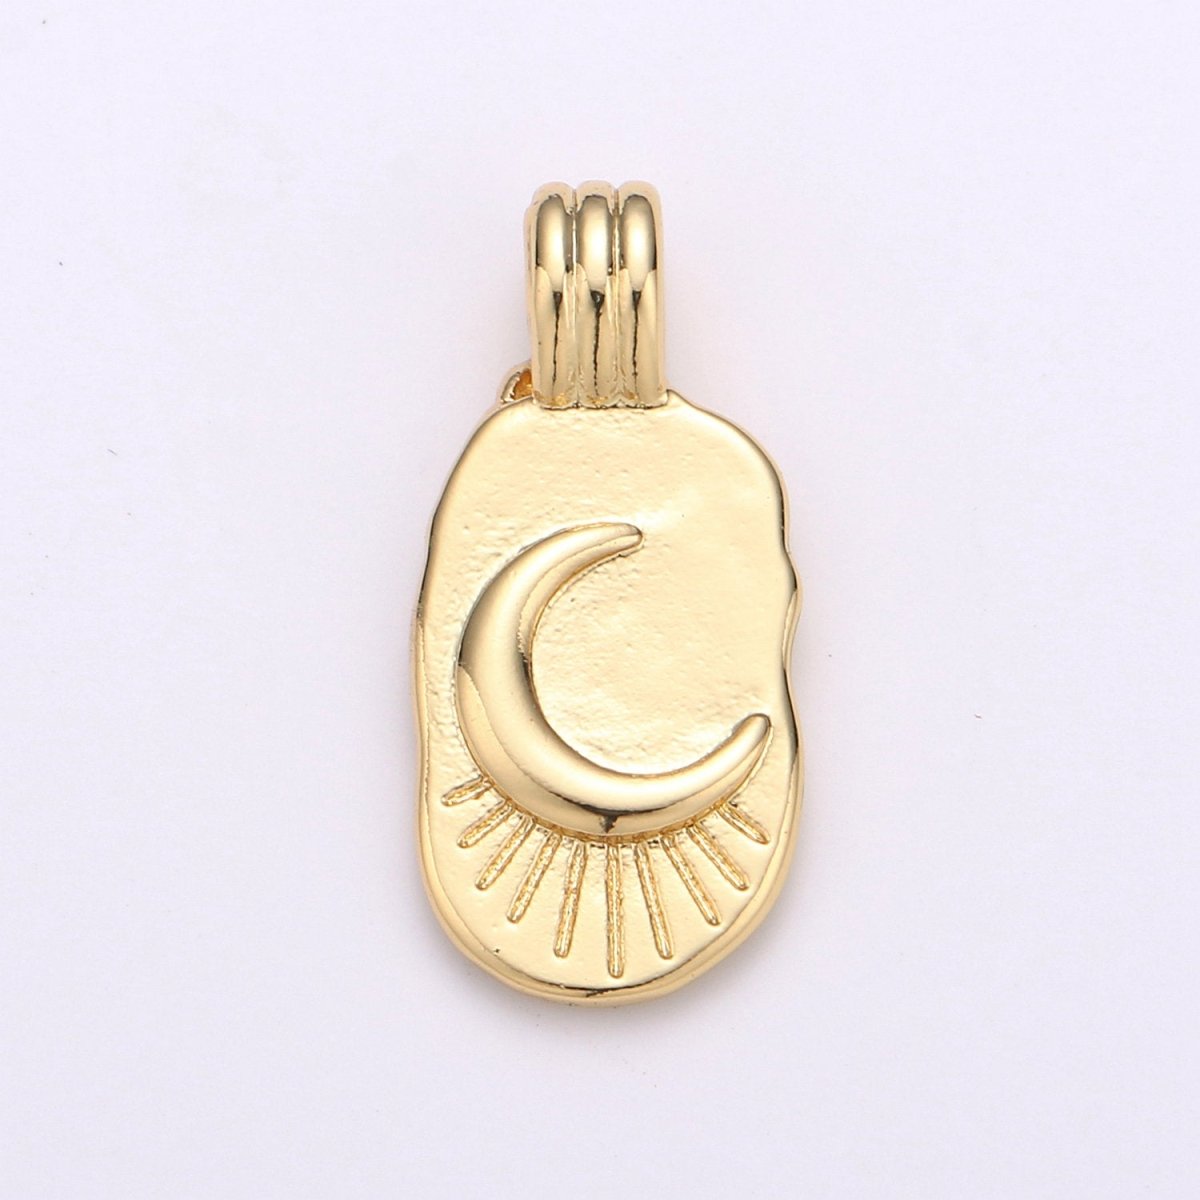 Dainty 14k Gold Filled Moon Charm - Gold Crescent Moon Pendant, Celestial Jewelry for Necklace Component Supply I-783 - DLUXCA